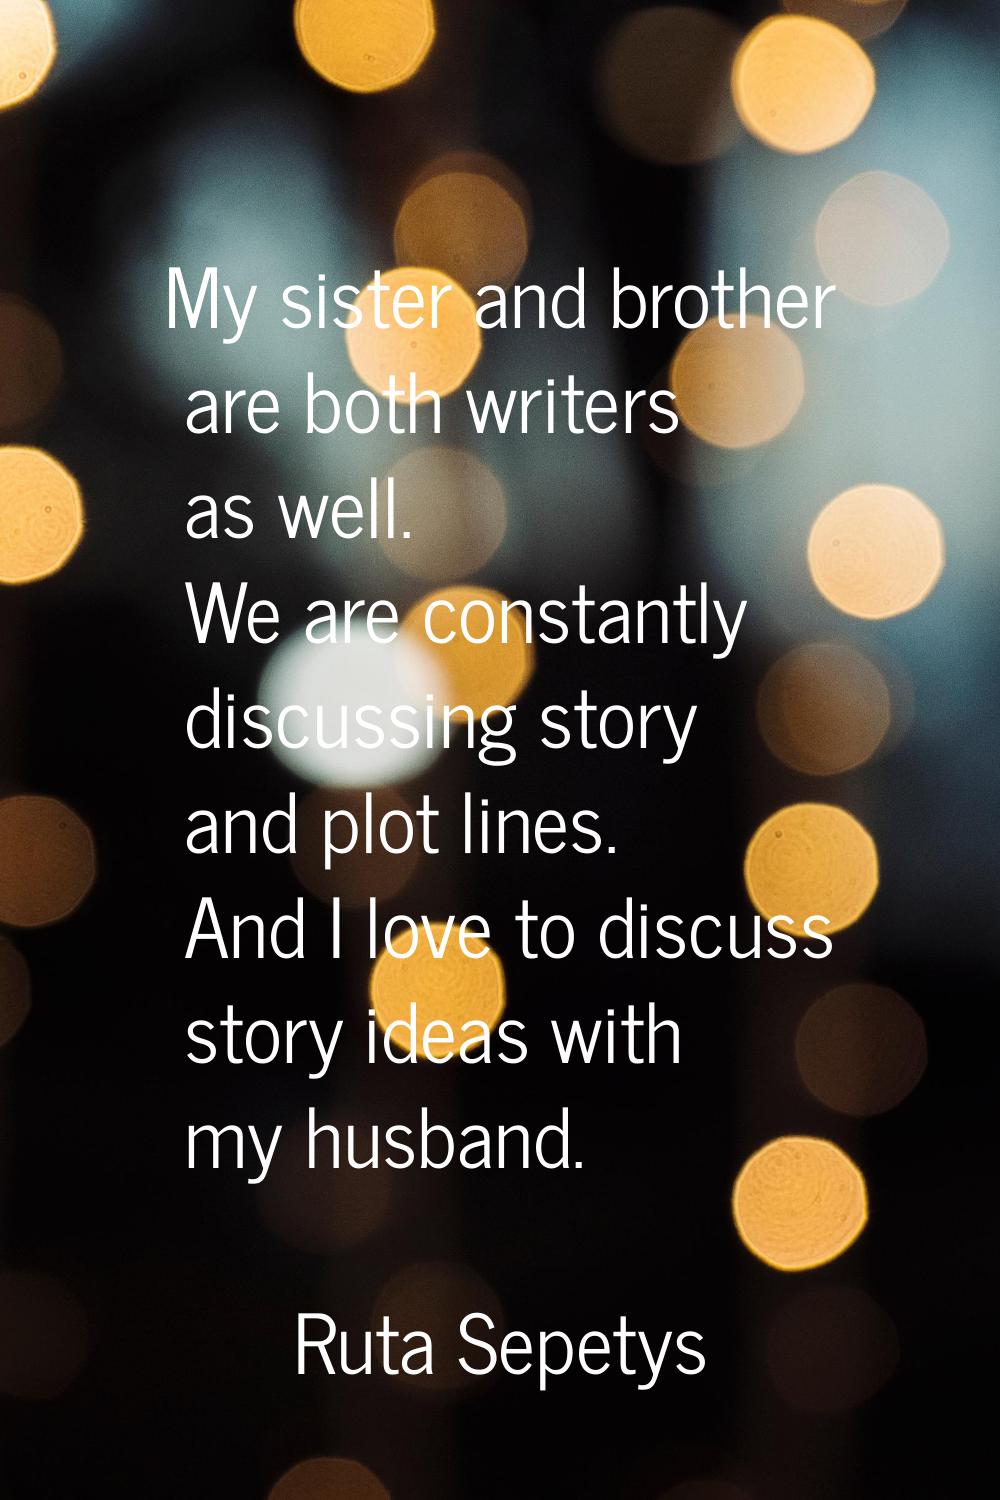 My sister and brother are both writers as well. We are constantly discussing story and plot lines. 